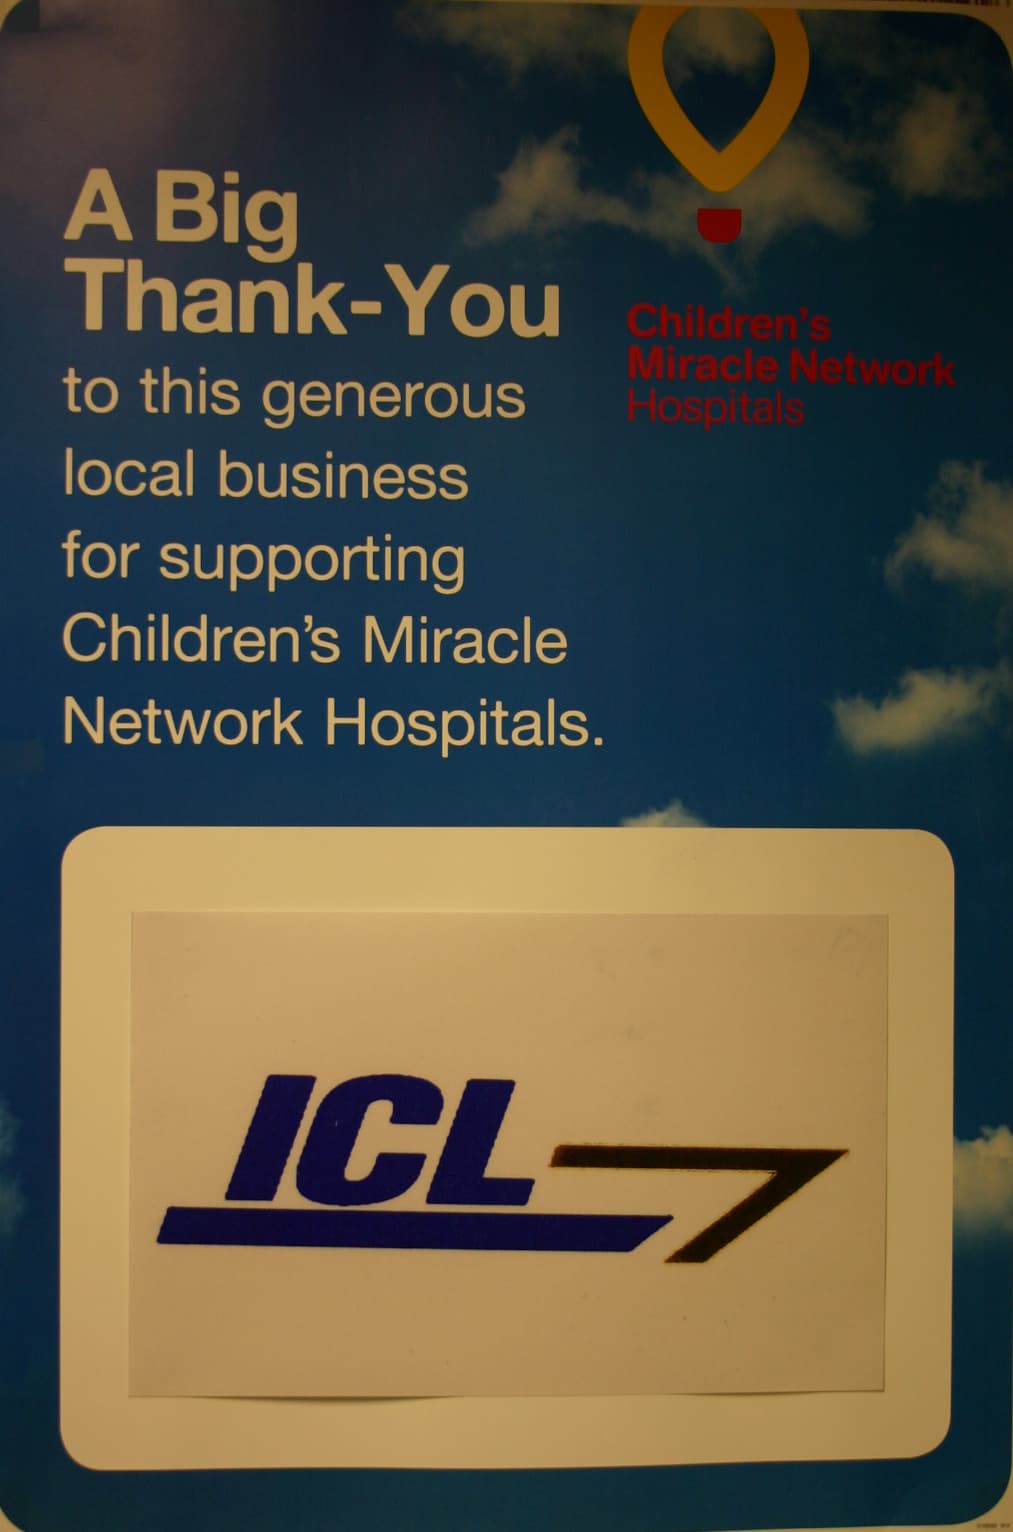 Children's miracle network